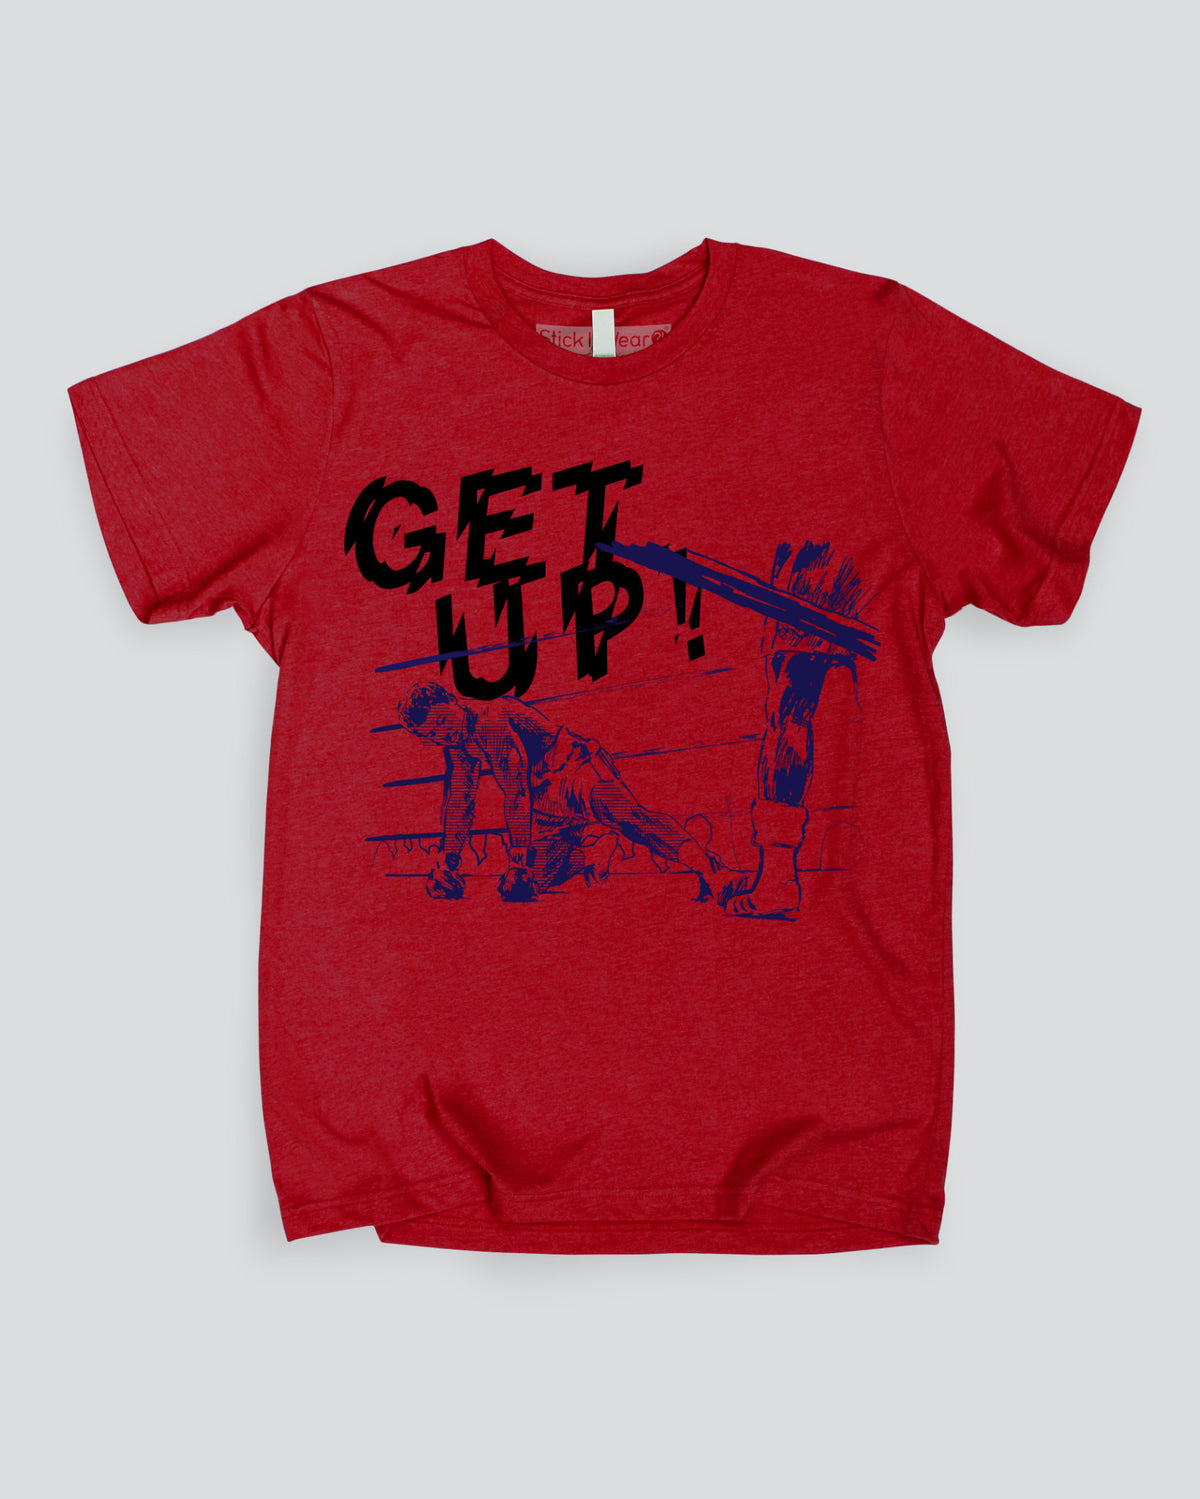 GET UP! Training Camp Boxing T-Shirt